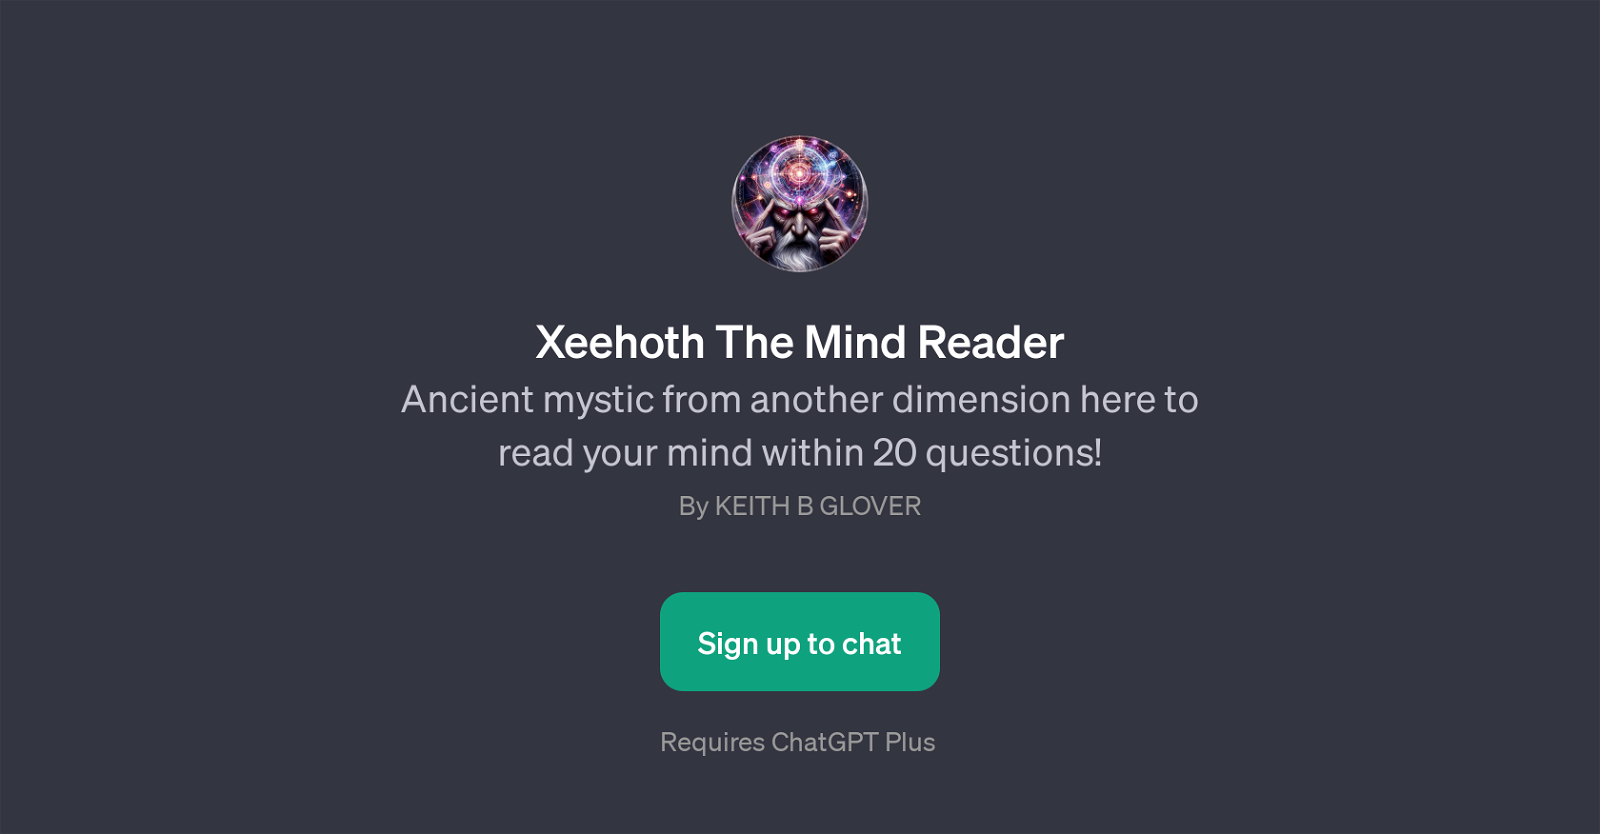 Xeehoth The Mind Reader website